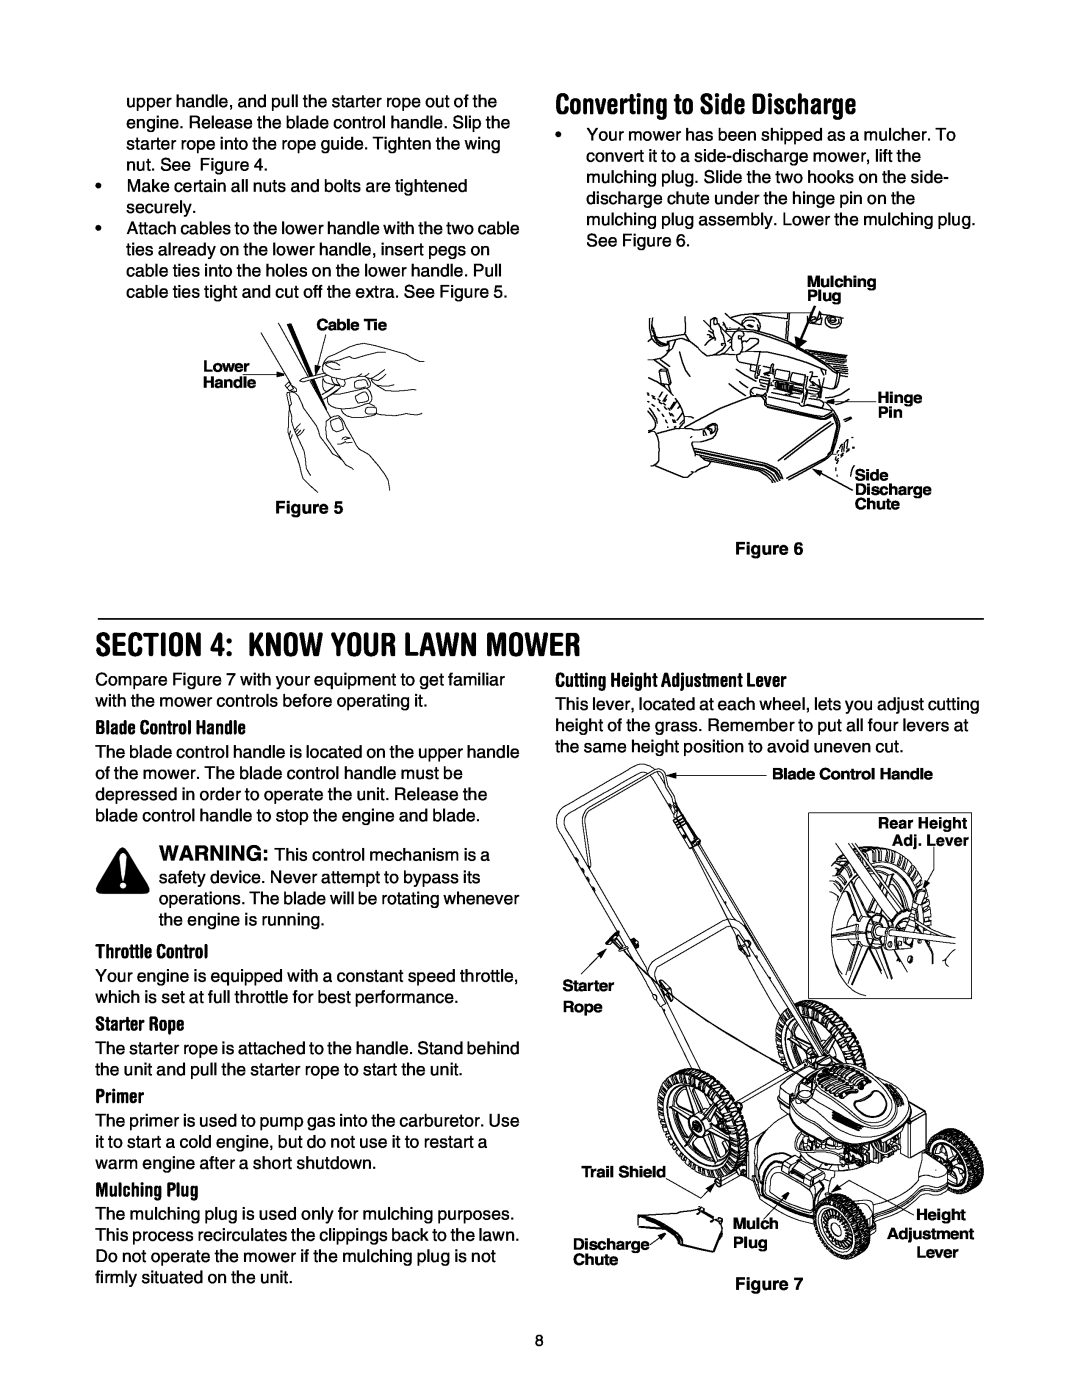 Yard-Man 573 Know Your Lawn Mower, Converting to Side Discharge, Blade Control Handle, Throttle Control, Starter Rope 